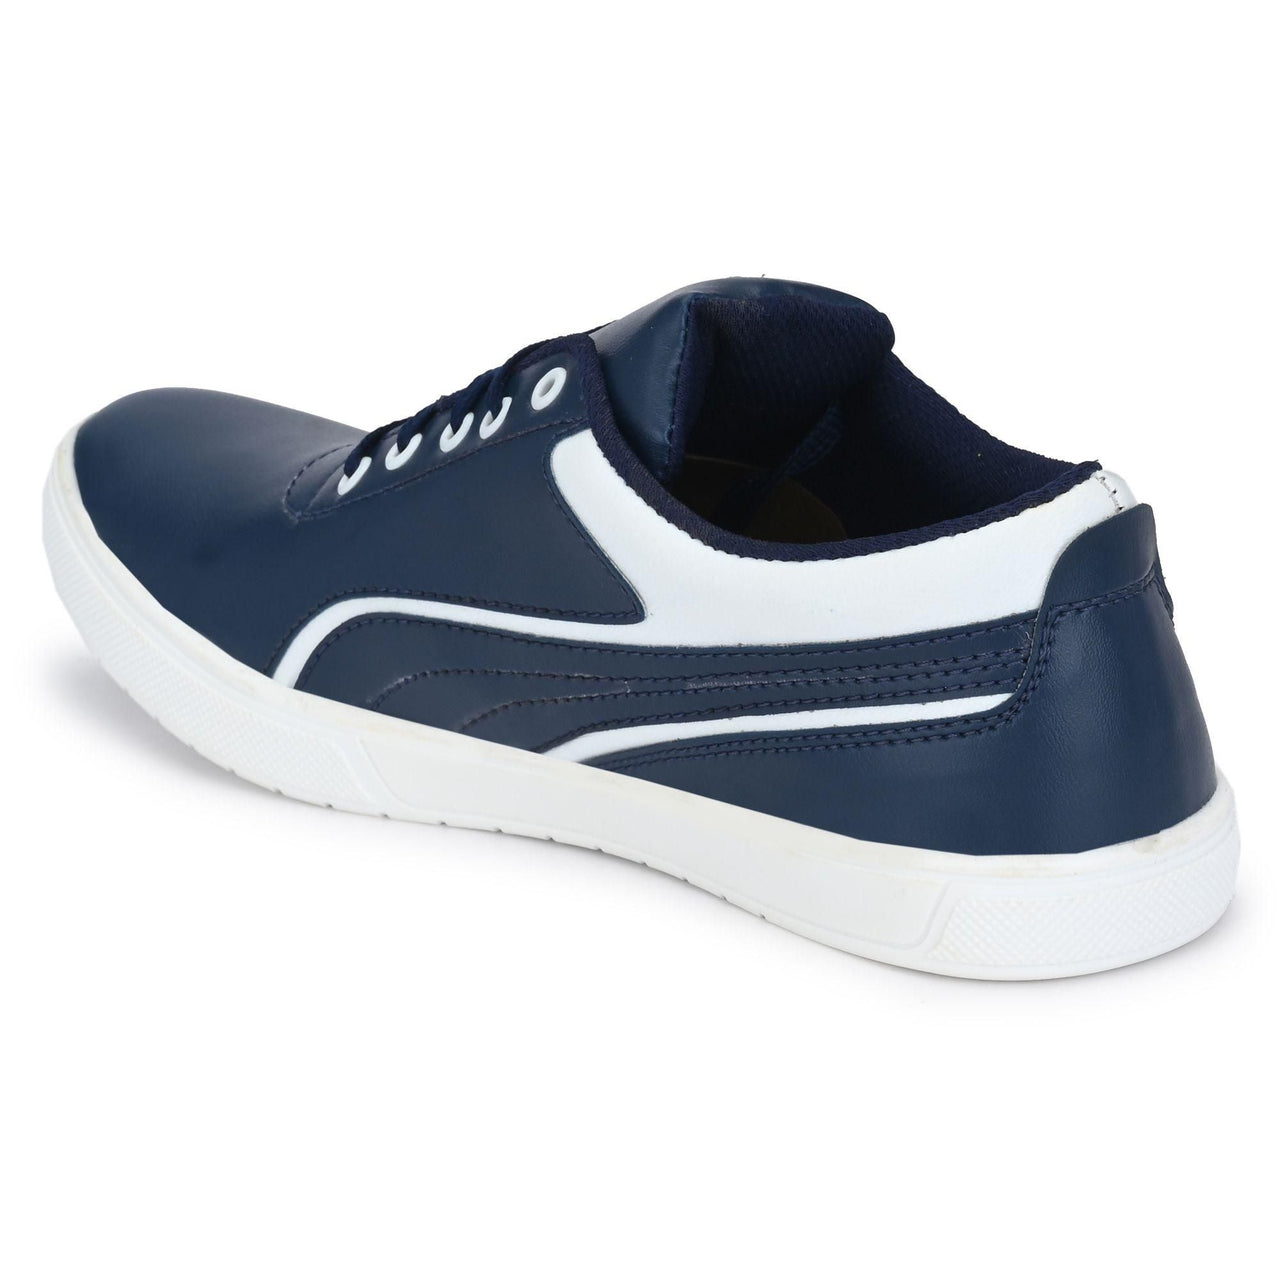 Groofer Stylish Casual Shoes For Men's Shoes